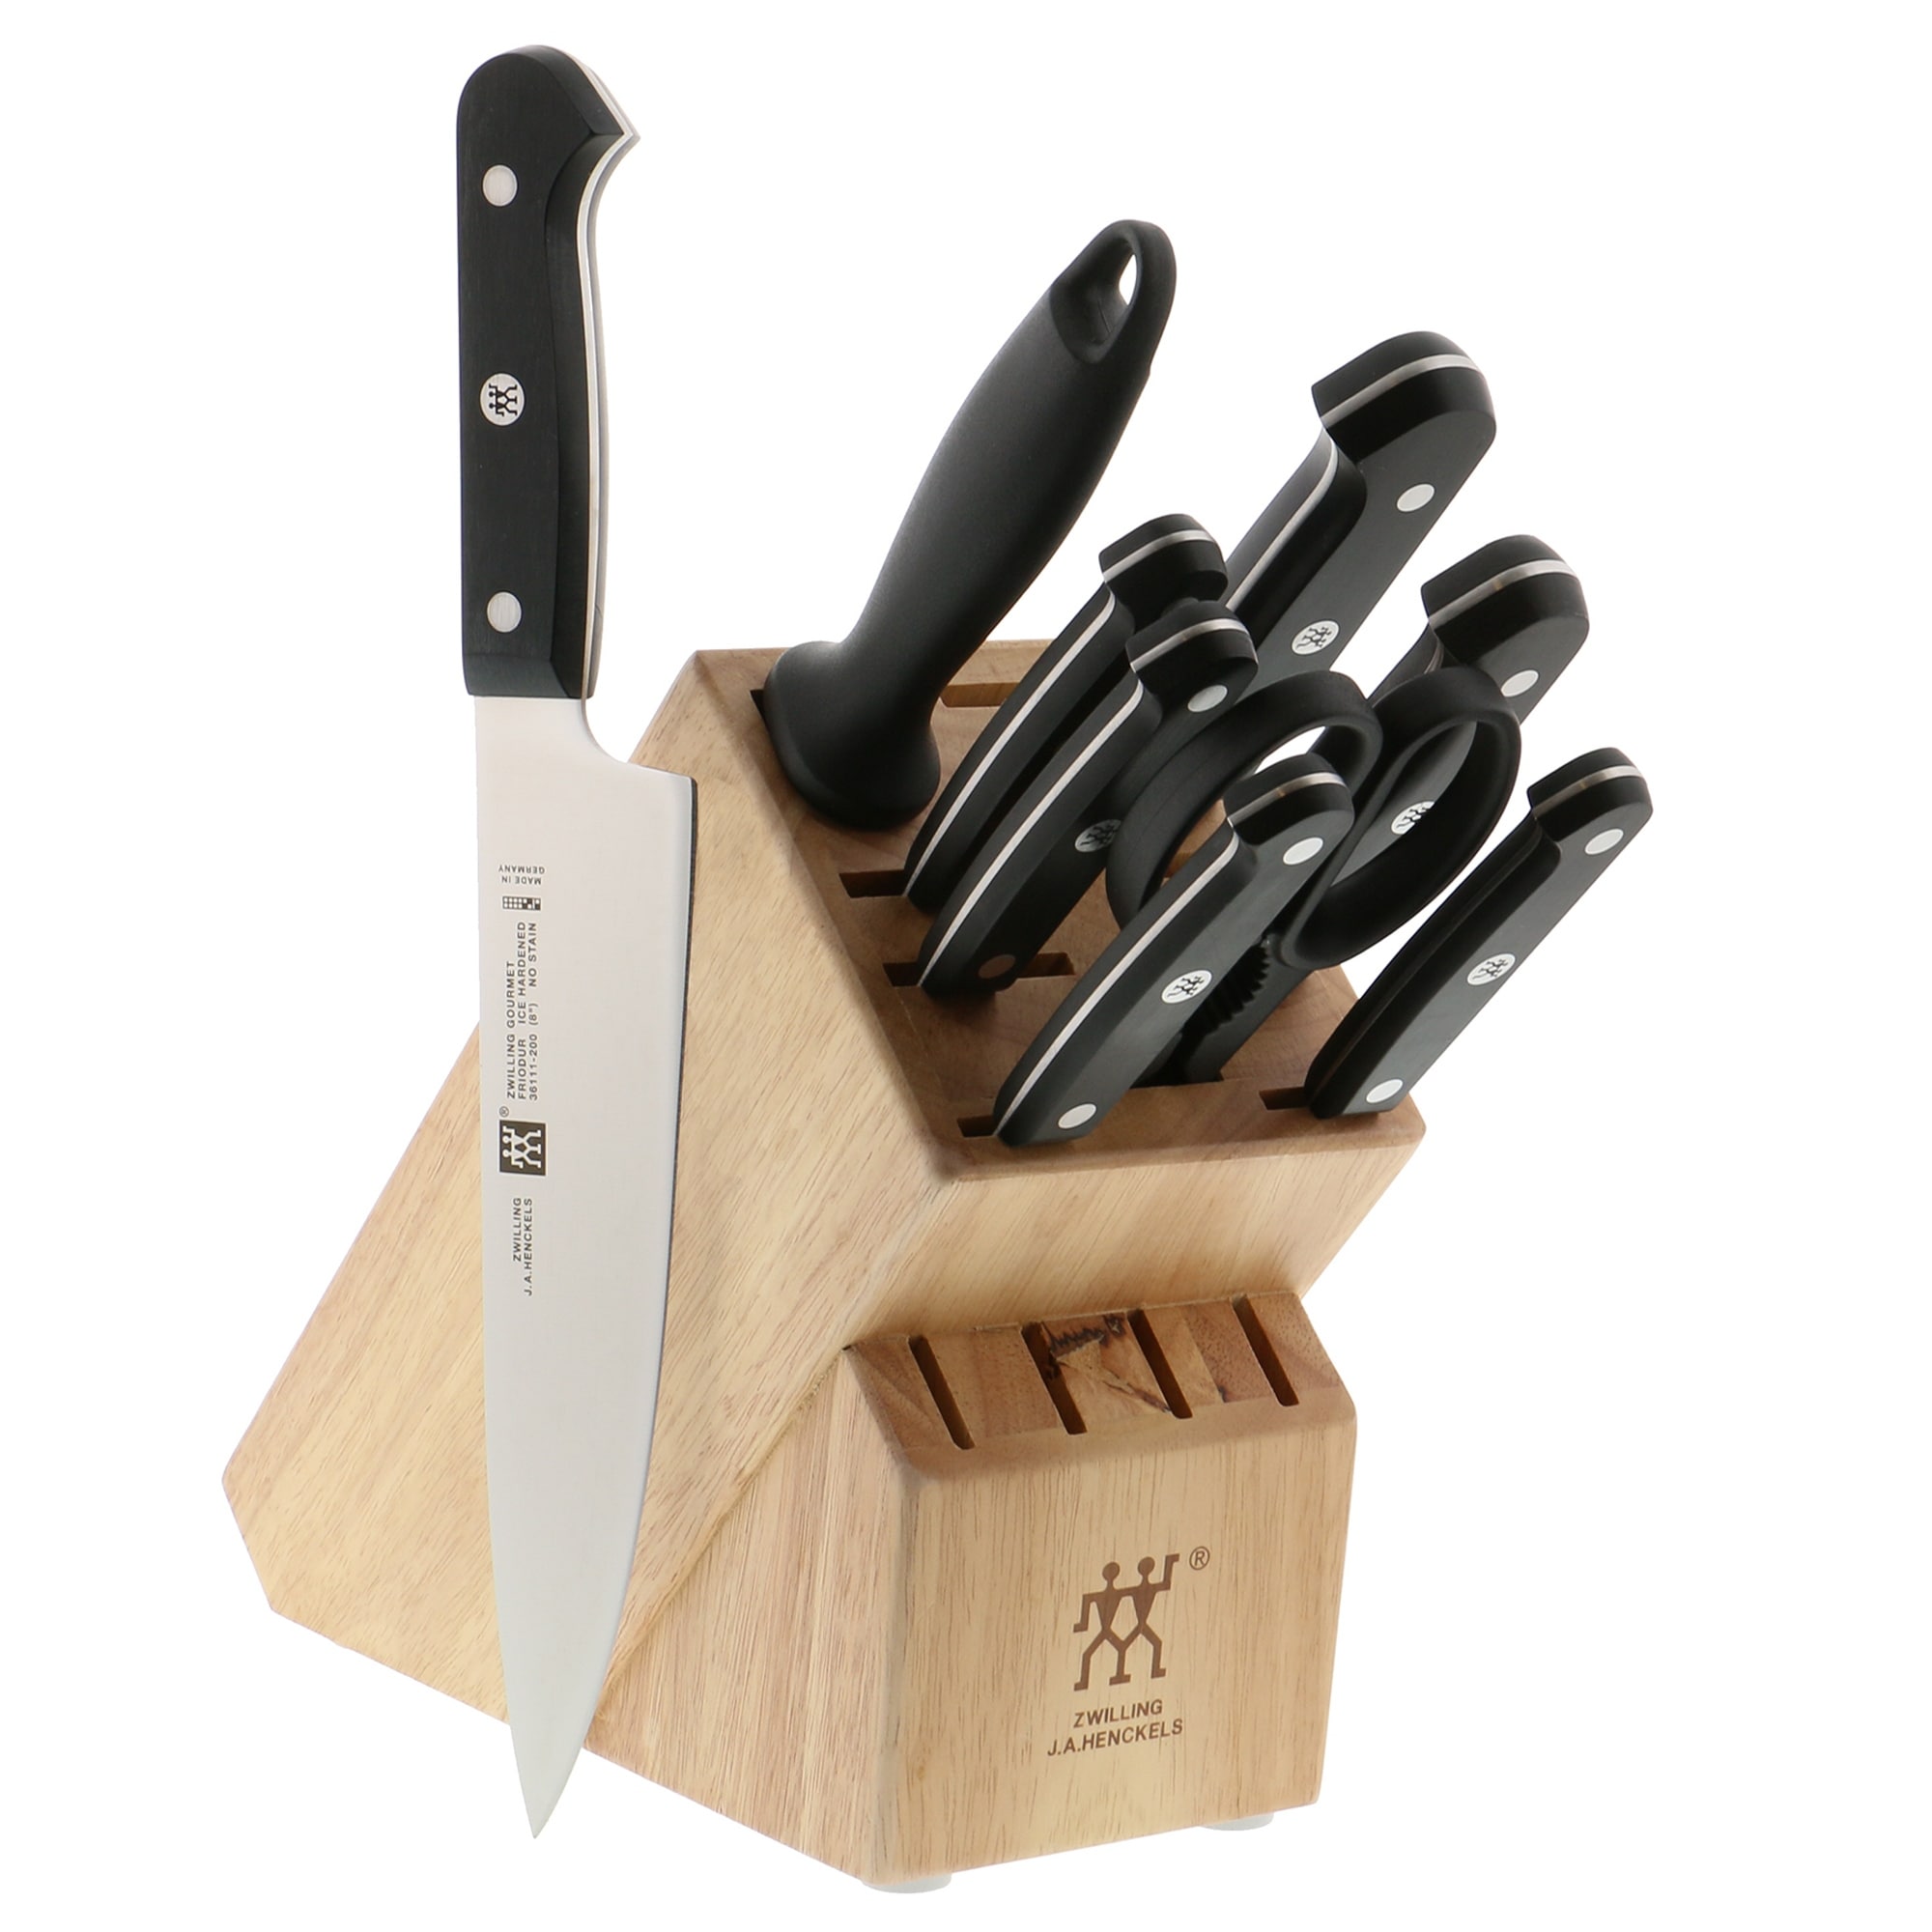 https://ak1.ostkcdn.com/images/products/is/images/direct/c150421c742d186c34faaf660d3f4ce387669f73/ZWILLING-Gourmet-10-pc-Knife-Block-Set.jpg